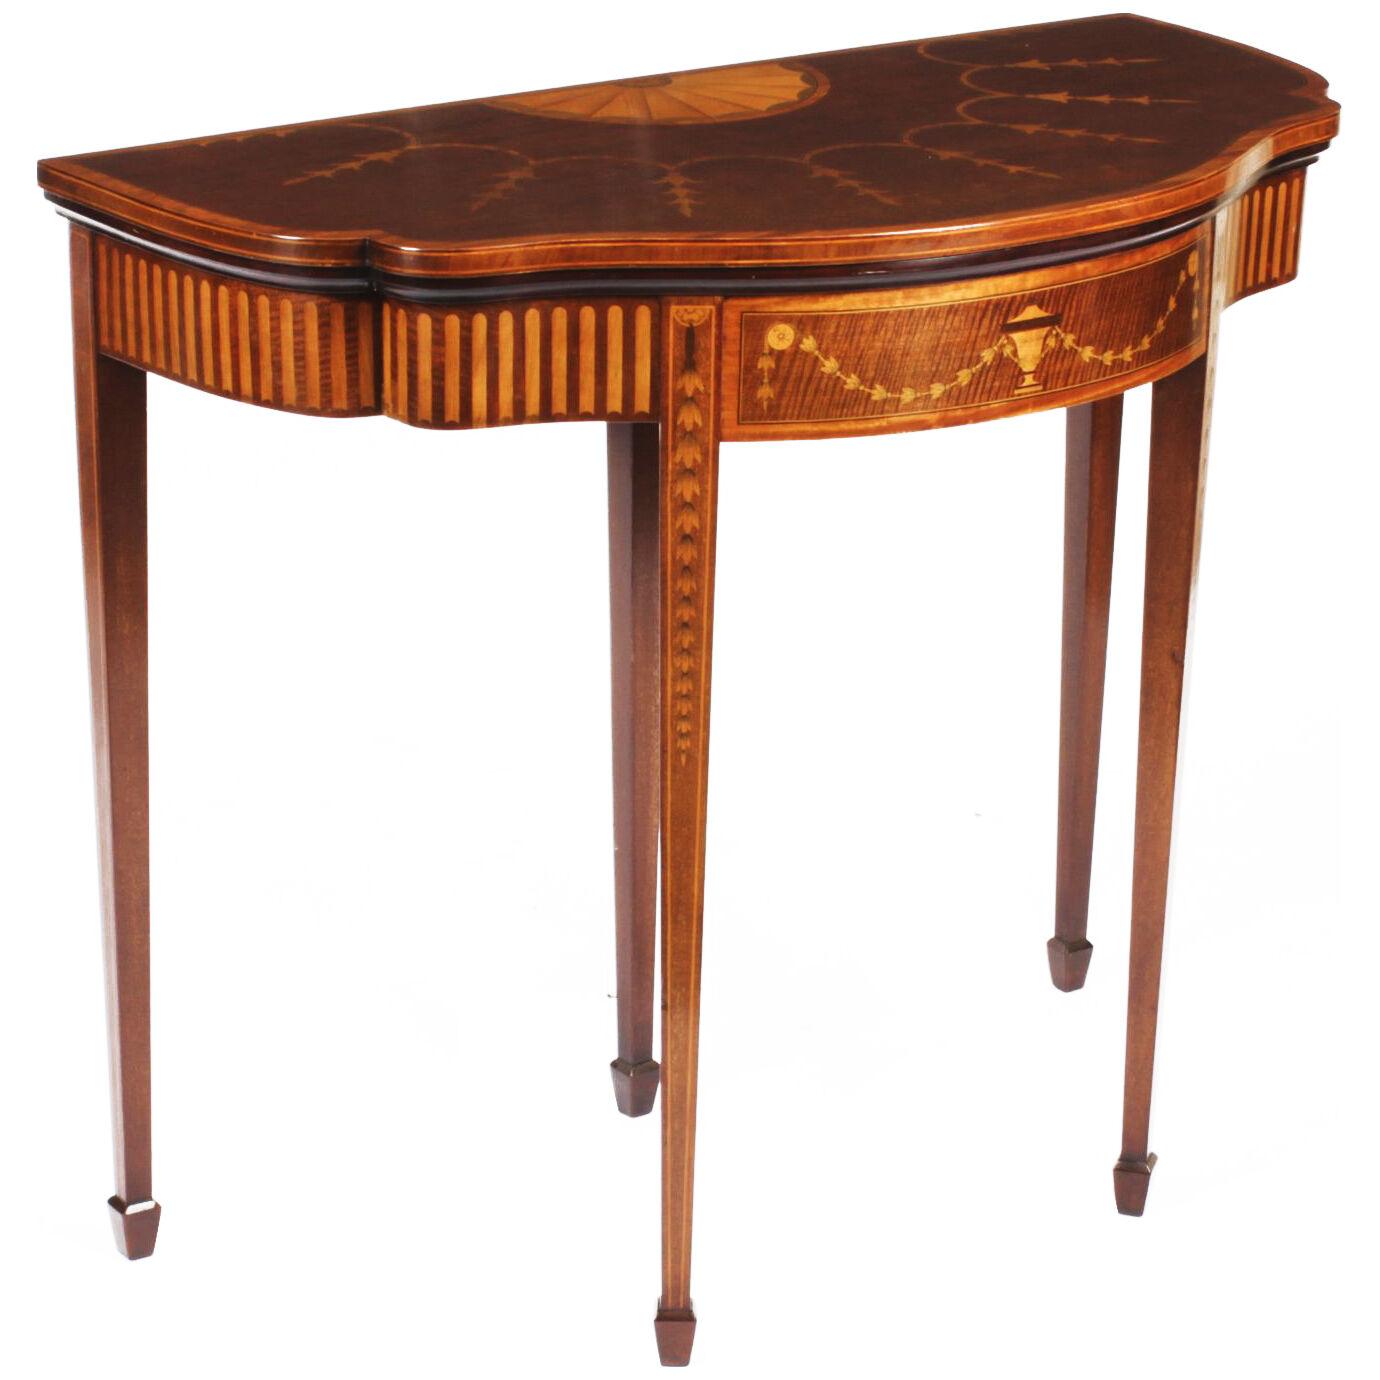 Antique Mahogany and Satinwood Inlaid Serpentine Card Console Table Circa 1880